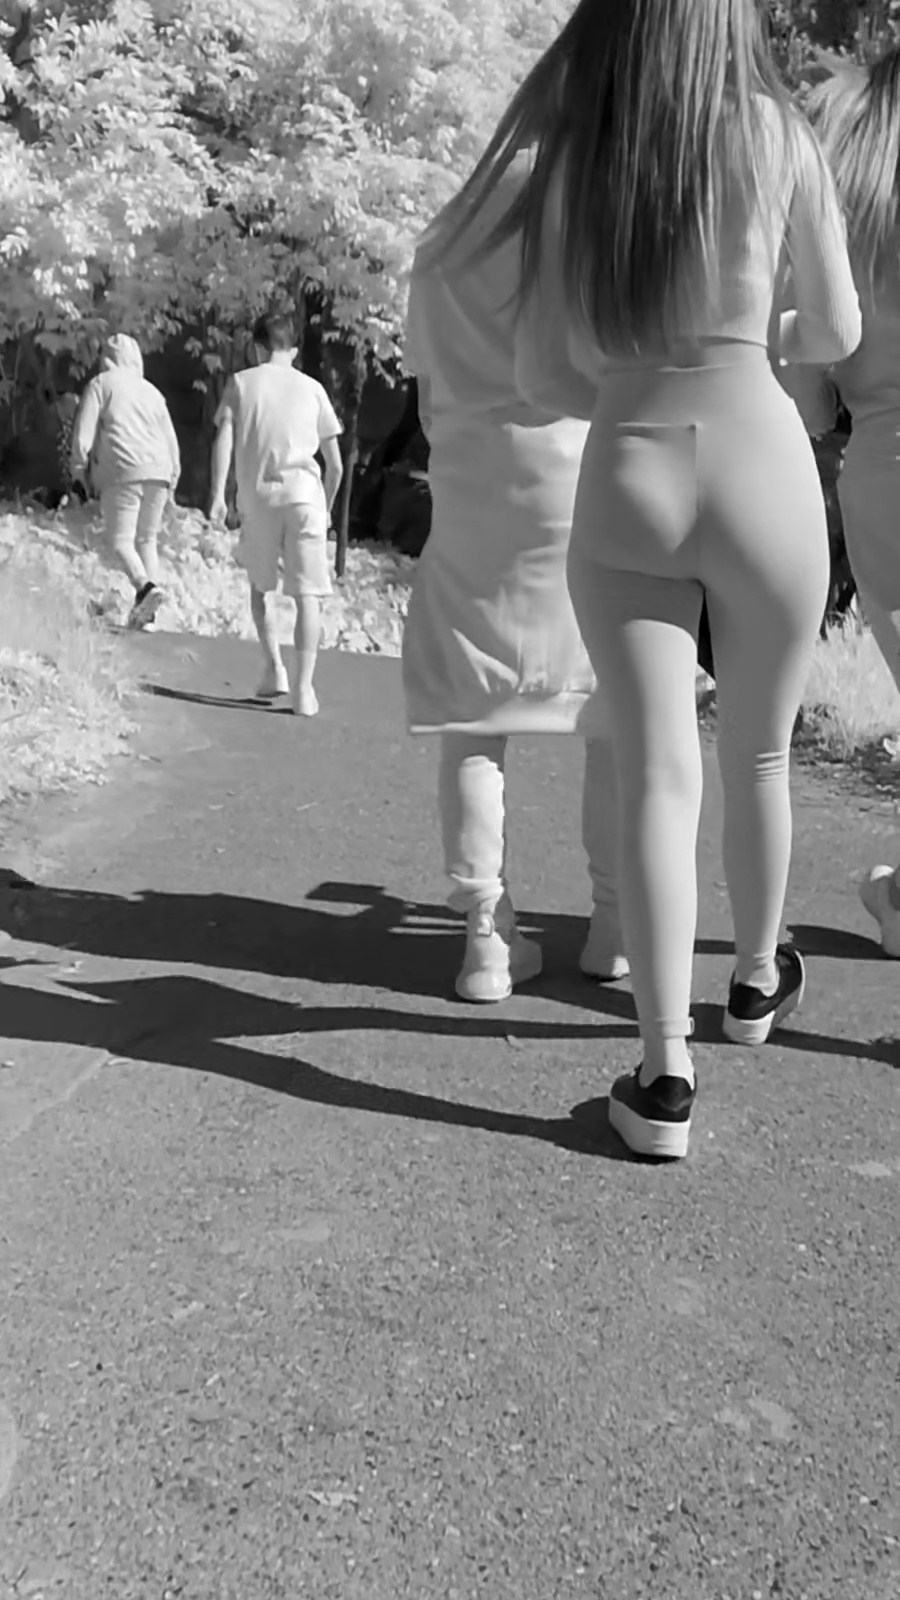 Cute Slim TEEN With BIG ASS In White Spandex With Visible Panty Lines - Candid Teens - Creepshots - Candid Voyeur Girls - Candid Ass Girls picture